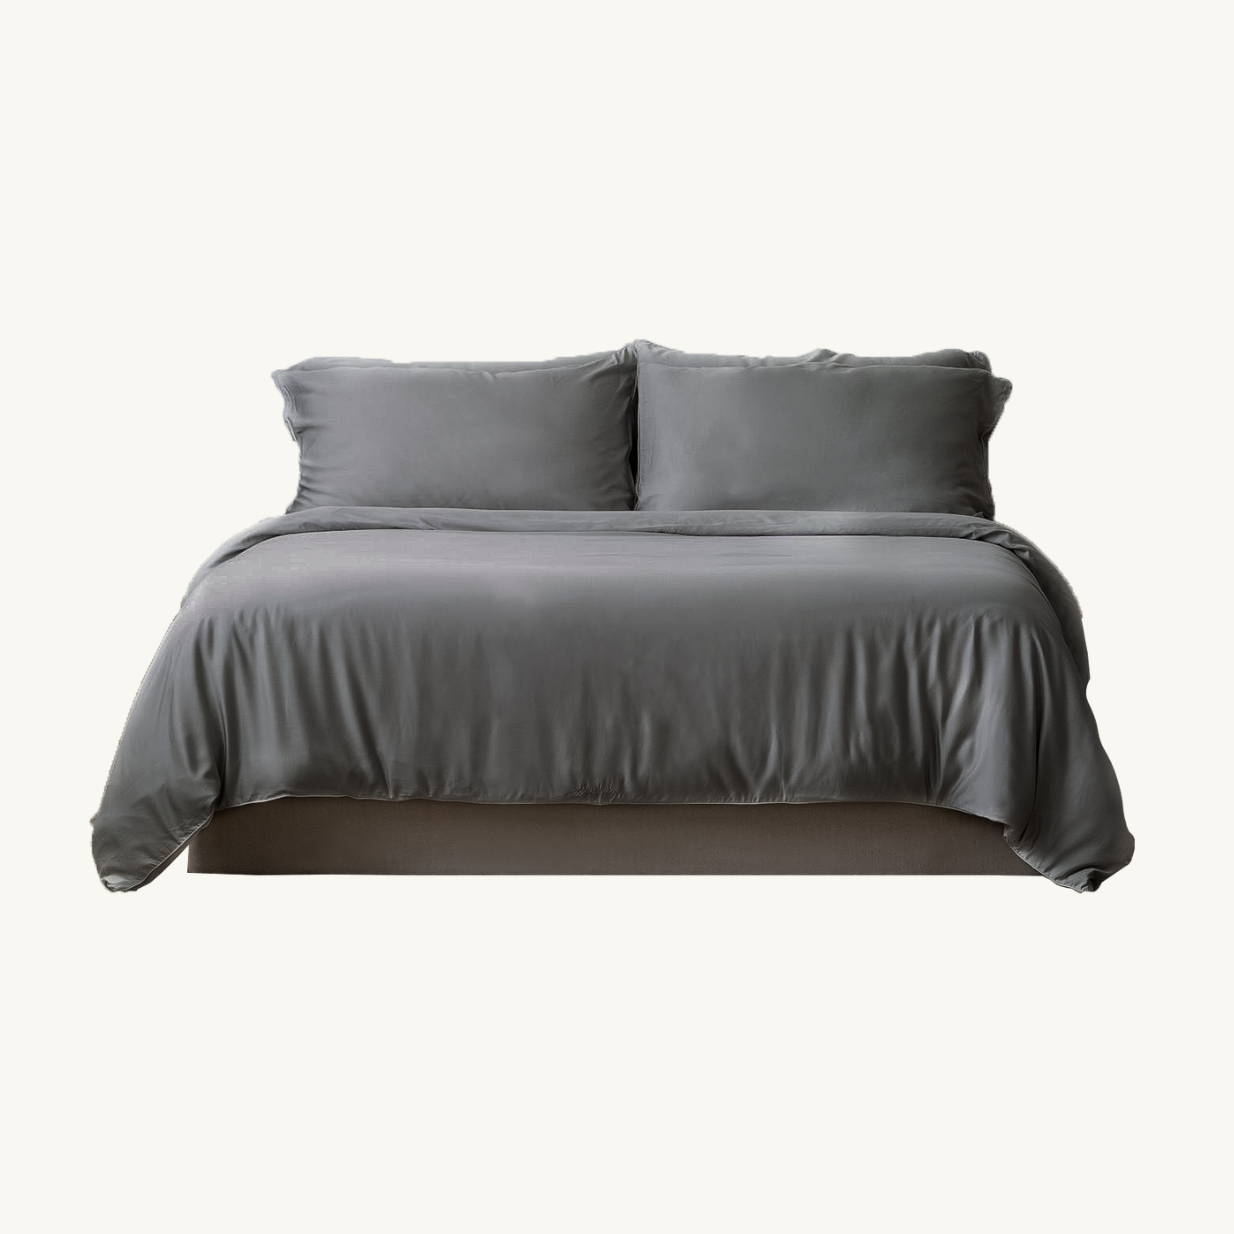 Everyday TENCEL Bed Sheets Classic Set Mist Grey